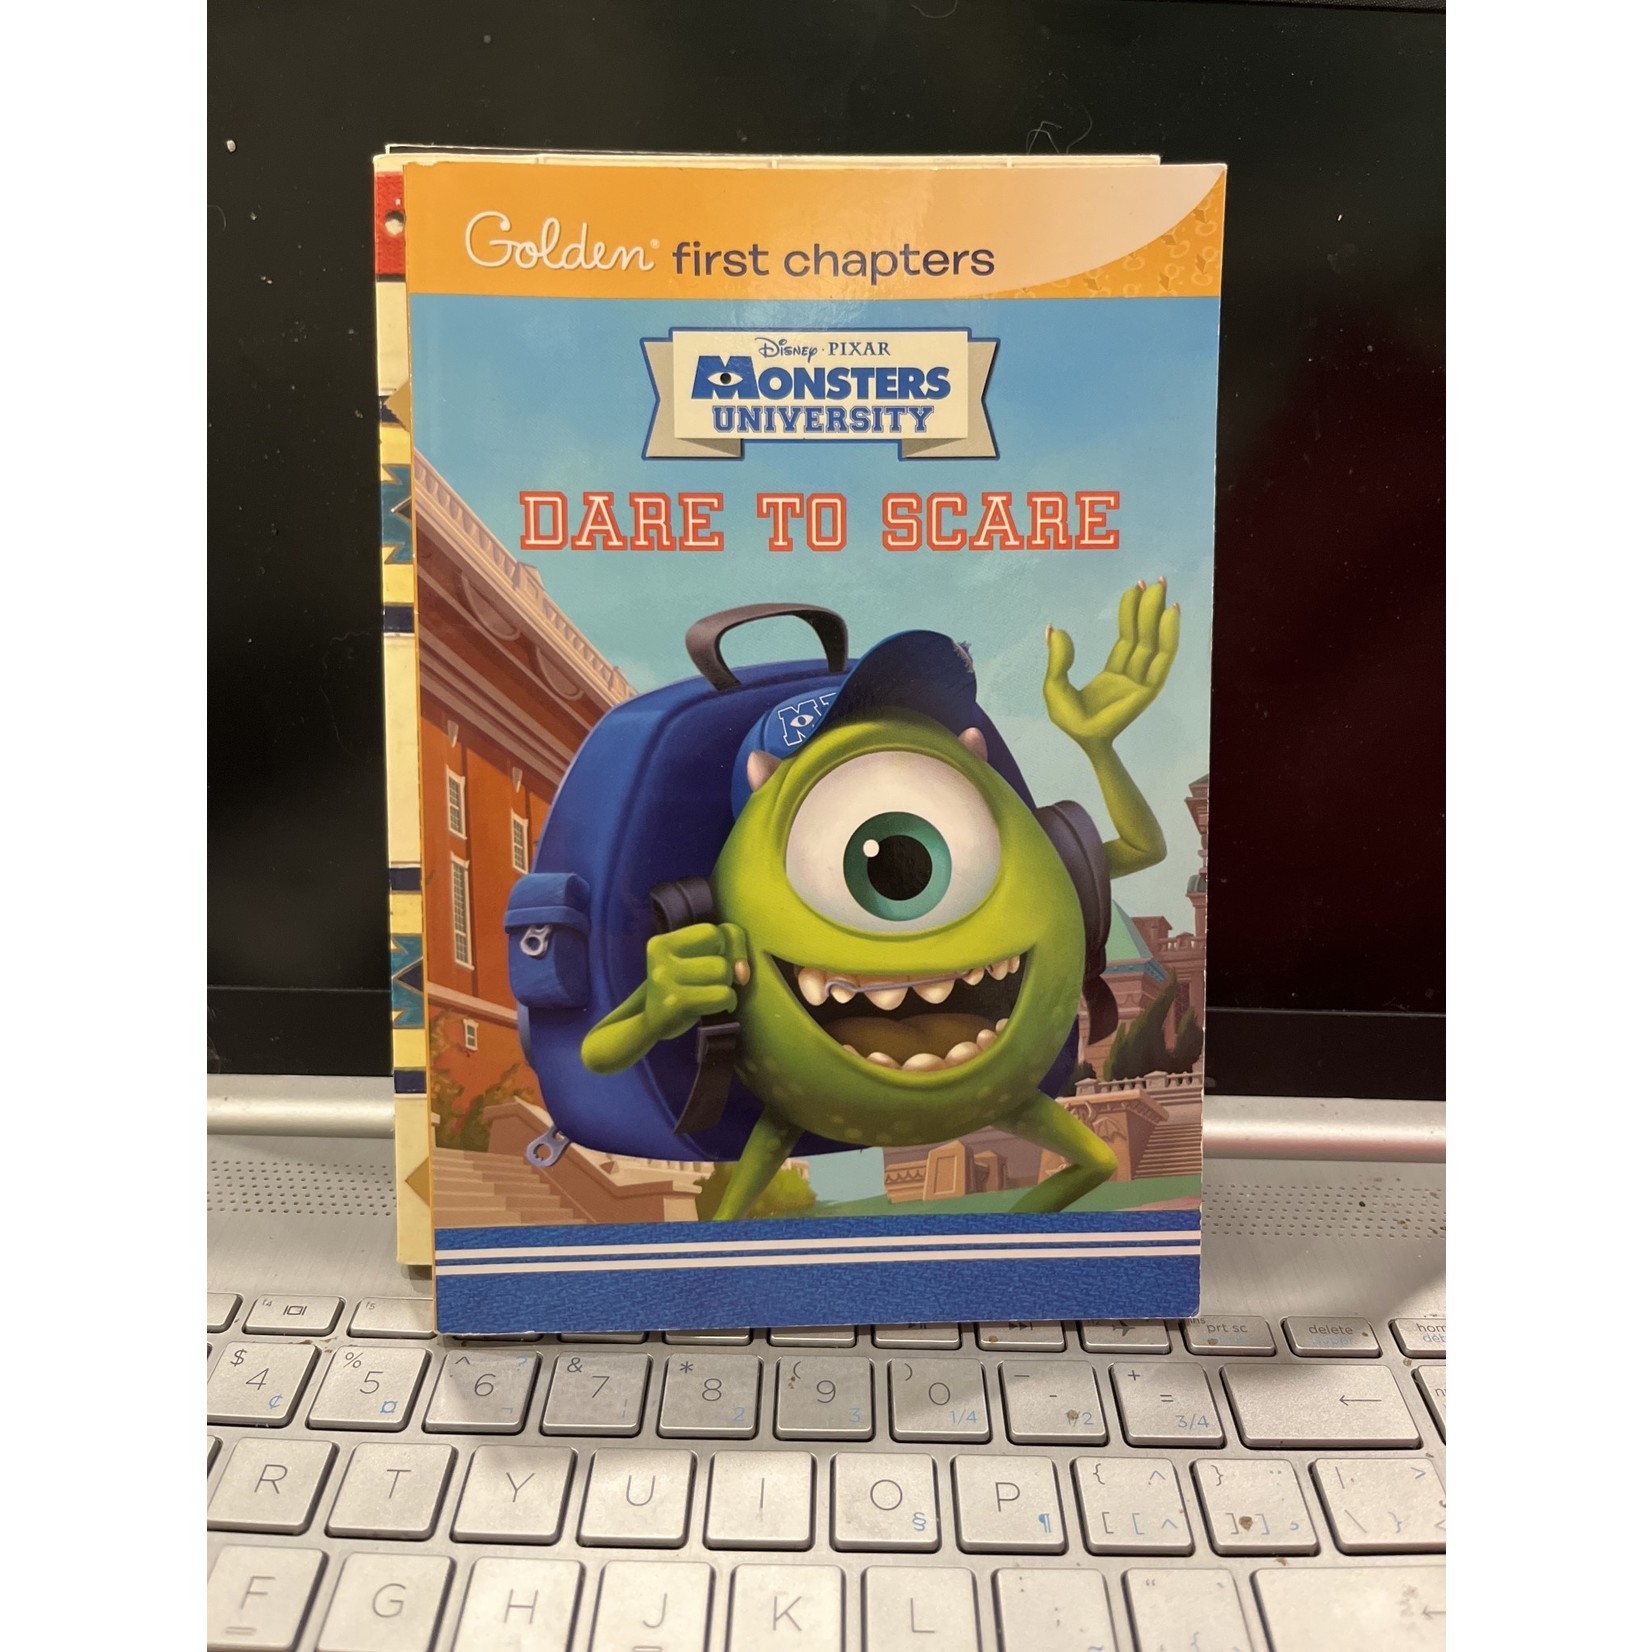 Golden First Chapters - Disney Pixar, Monsters University - Dare to Scare